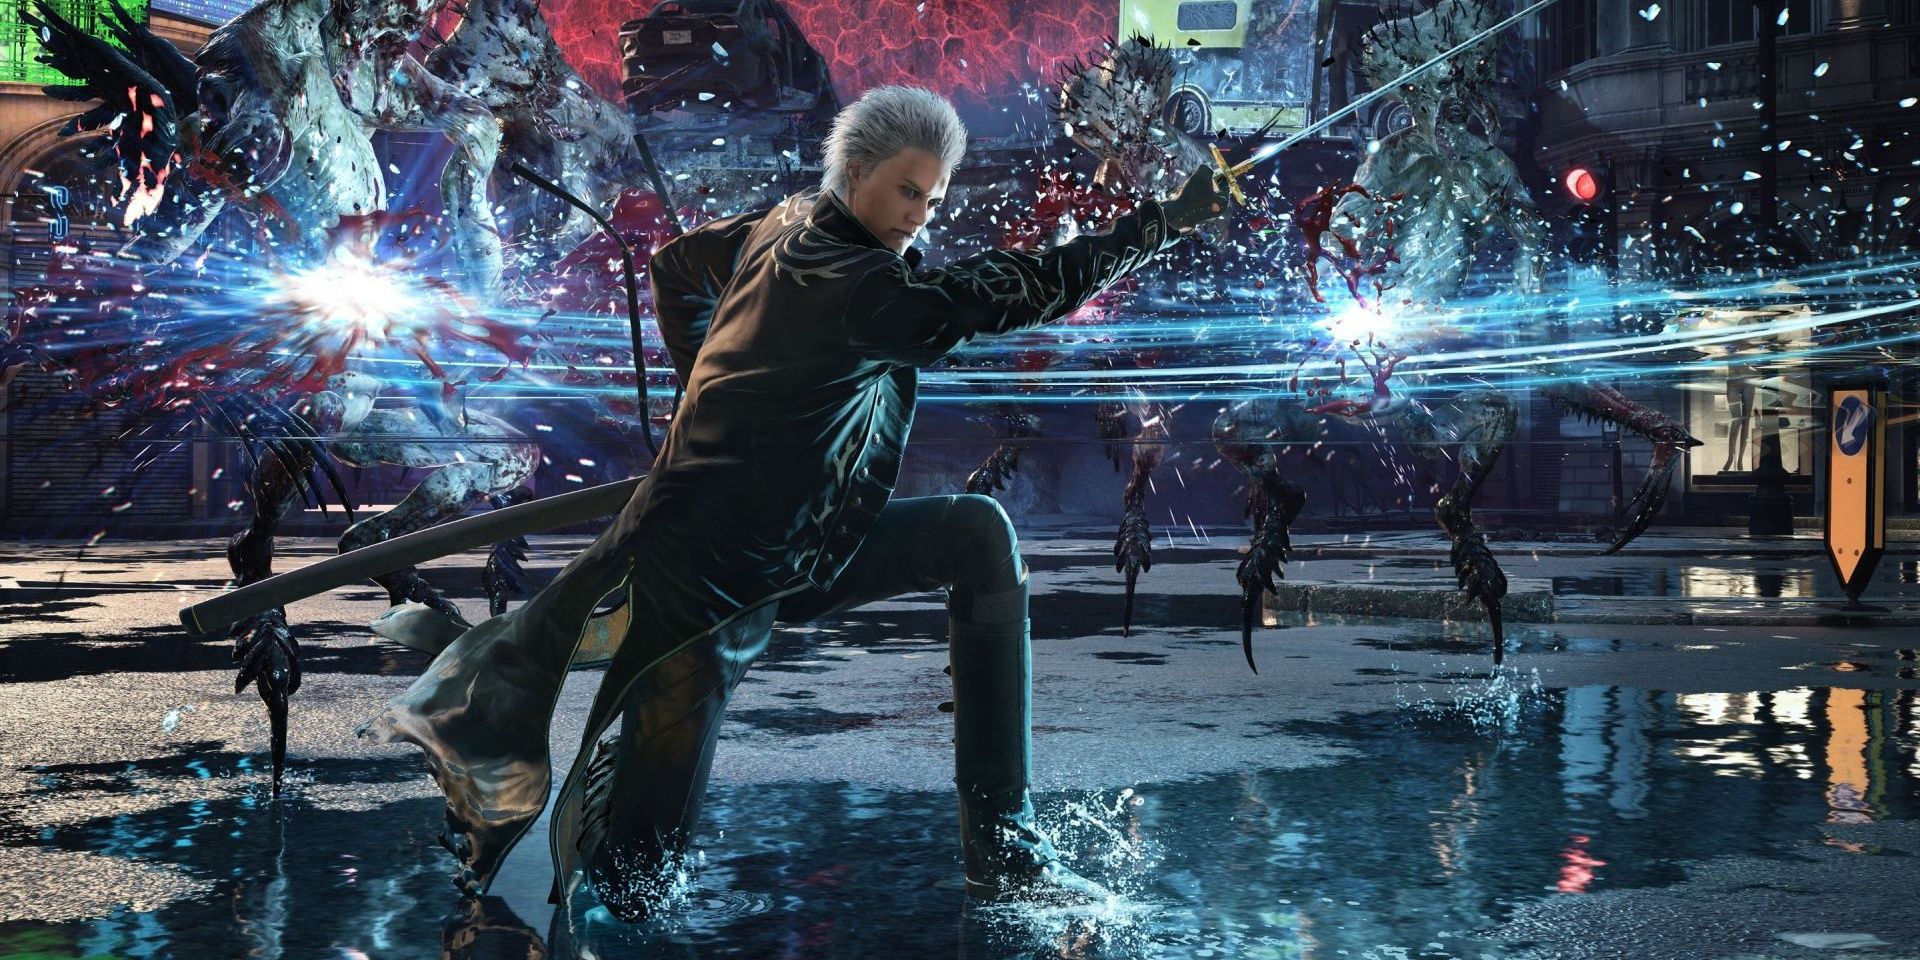 Vergil swinging a sword in Devil May Cry 5